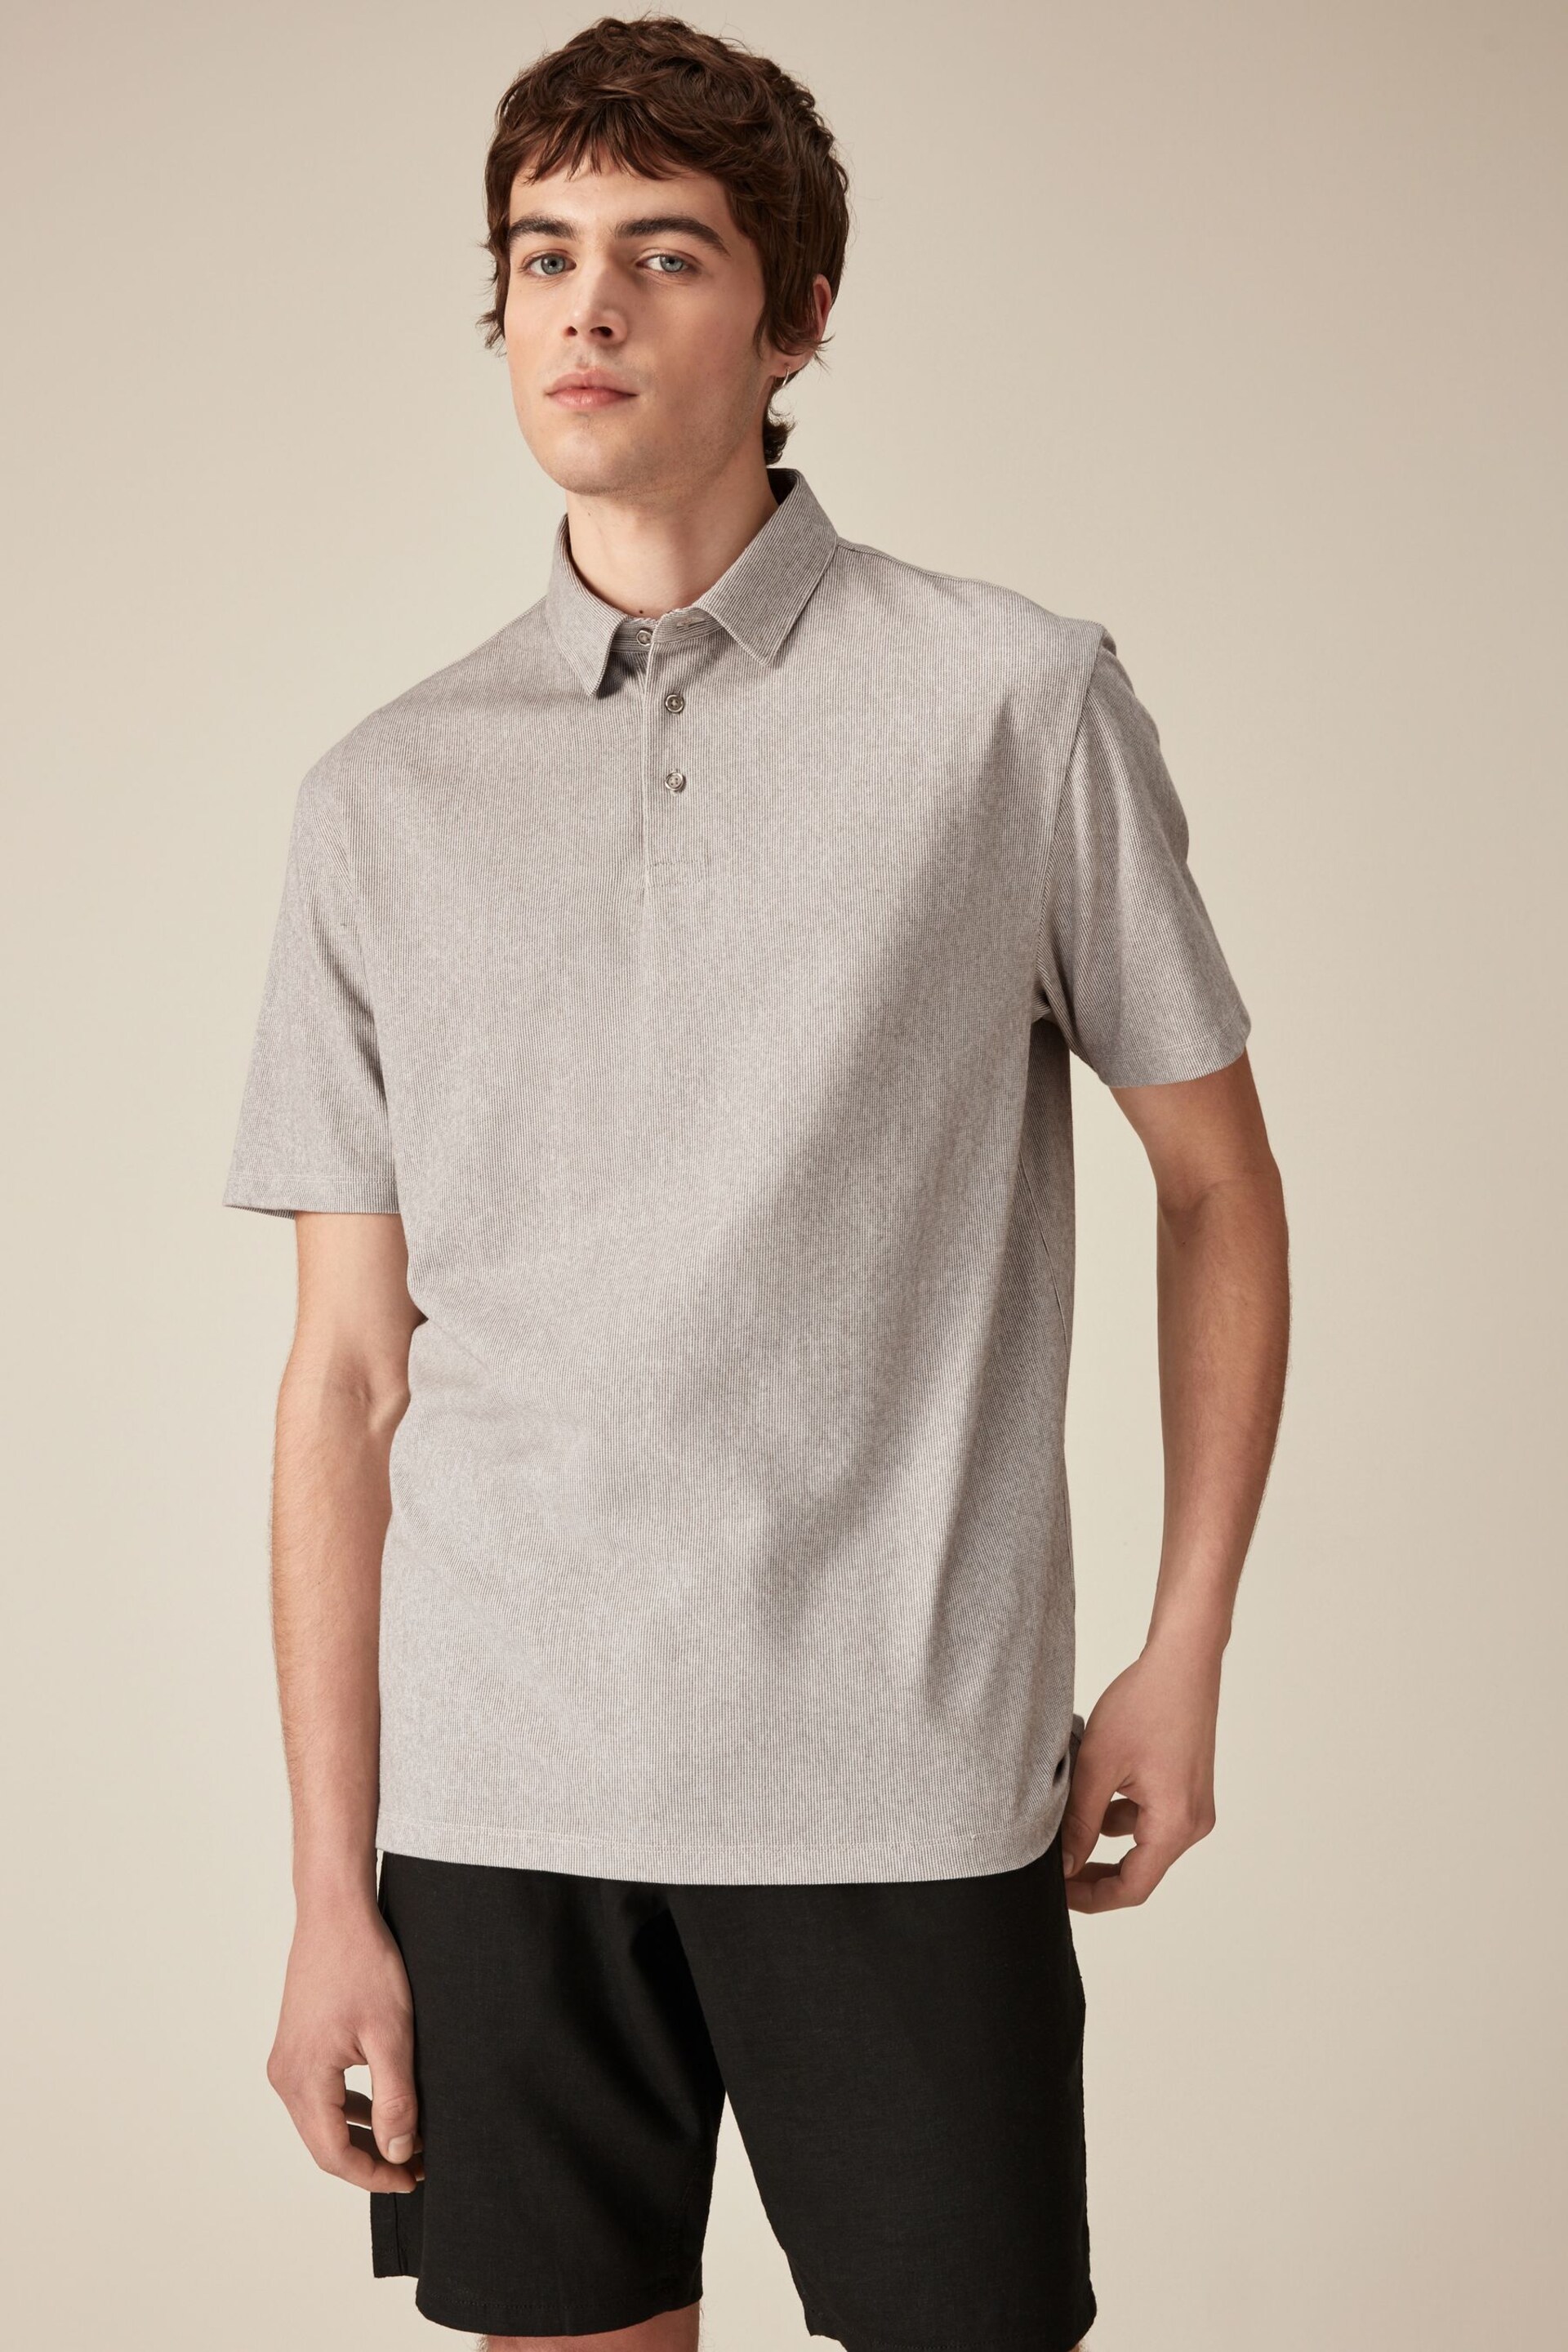 Neutral Oxford Cotton Blend Polo Shirt - Image 1 of 8